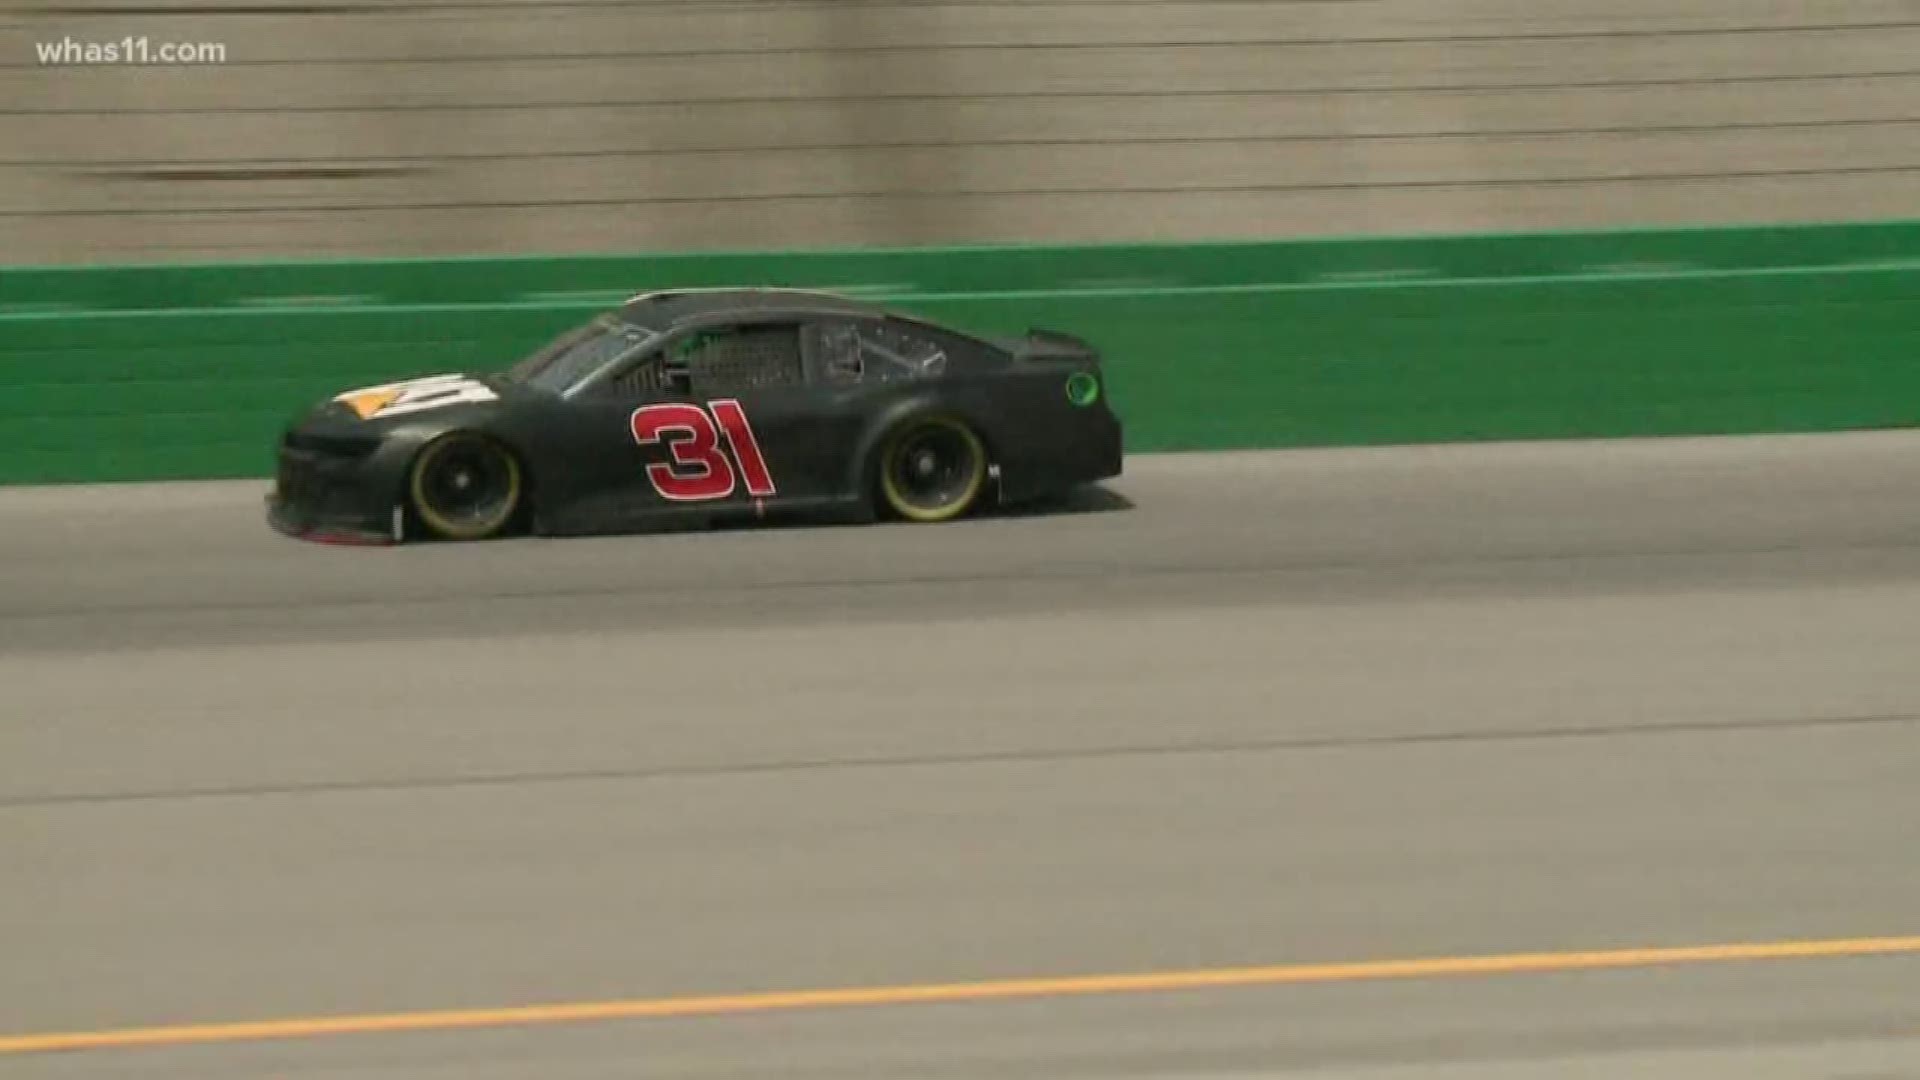 NASCAR will return to Kentucky Speedway in July, and preparations are already underway. Our Whitney Harding was in Sparta today as five NASCAR drivers took to the track for a tire test.